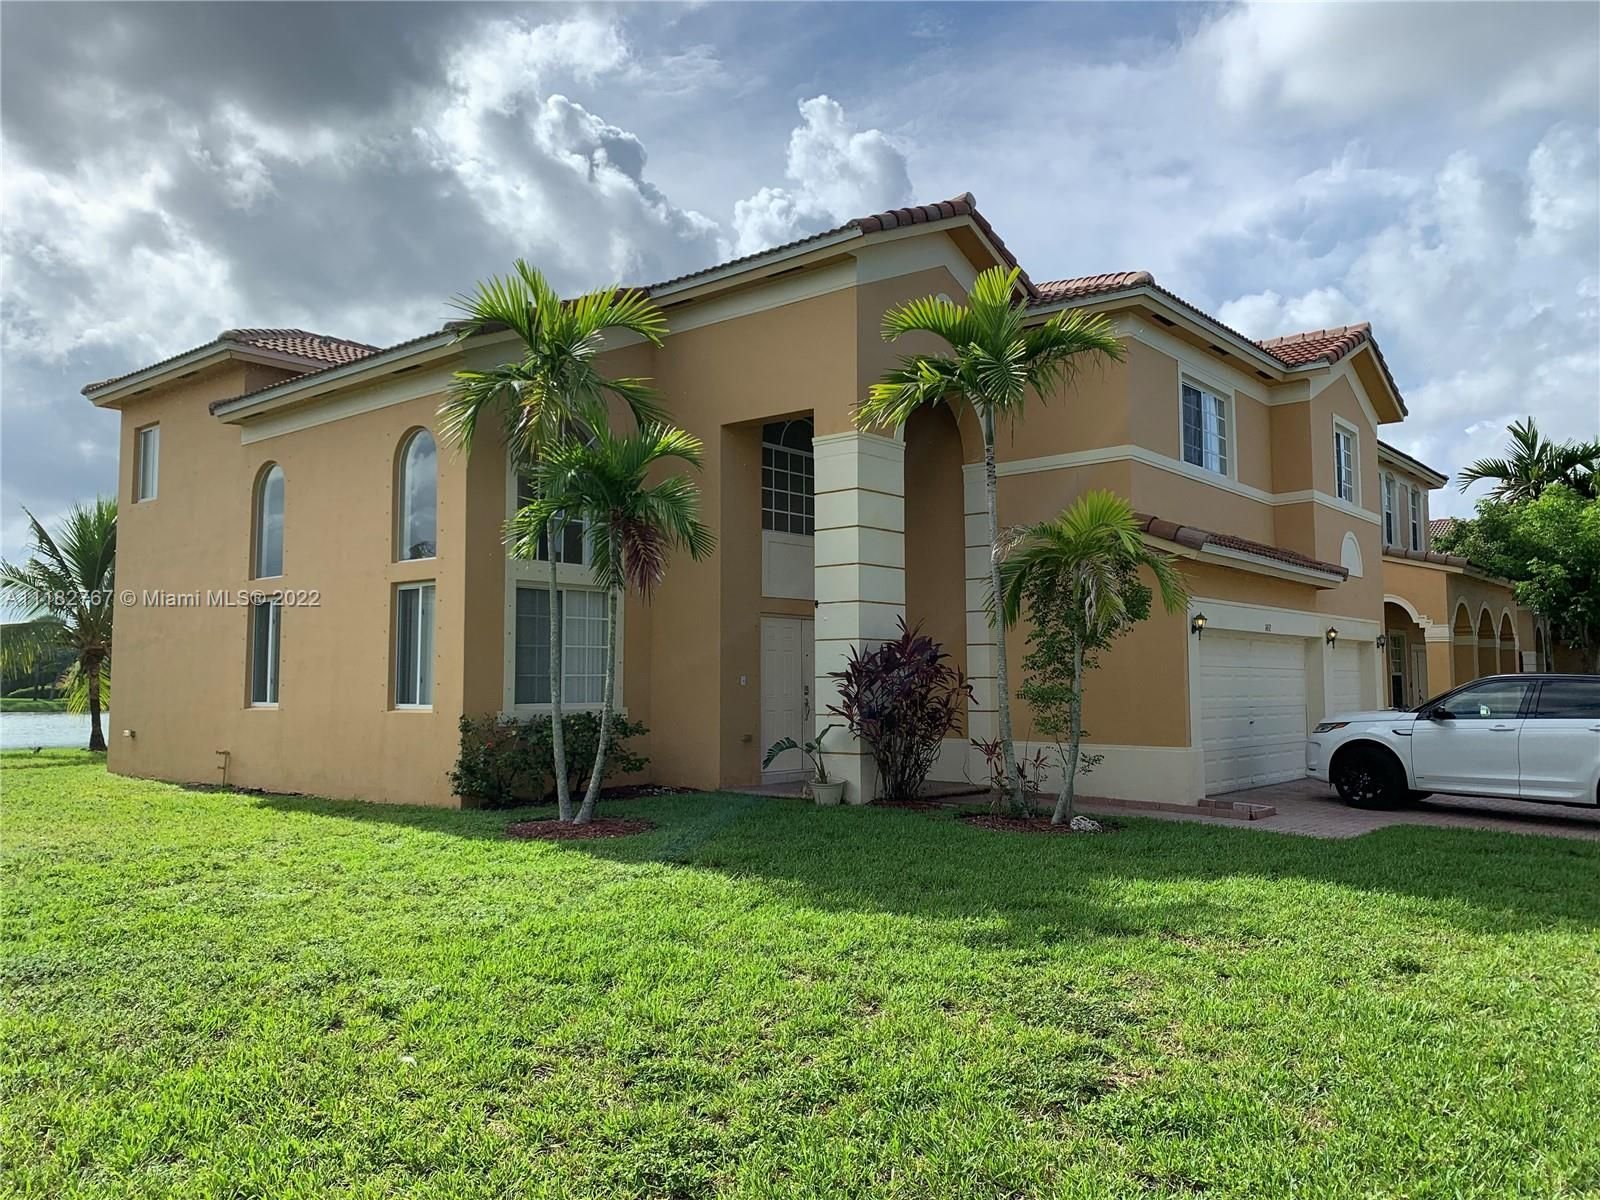 Real estate property located at 1452 40th Ave, Miami-Dade County, Homestead, FL